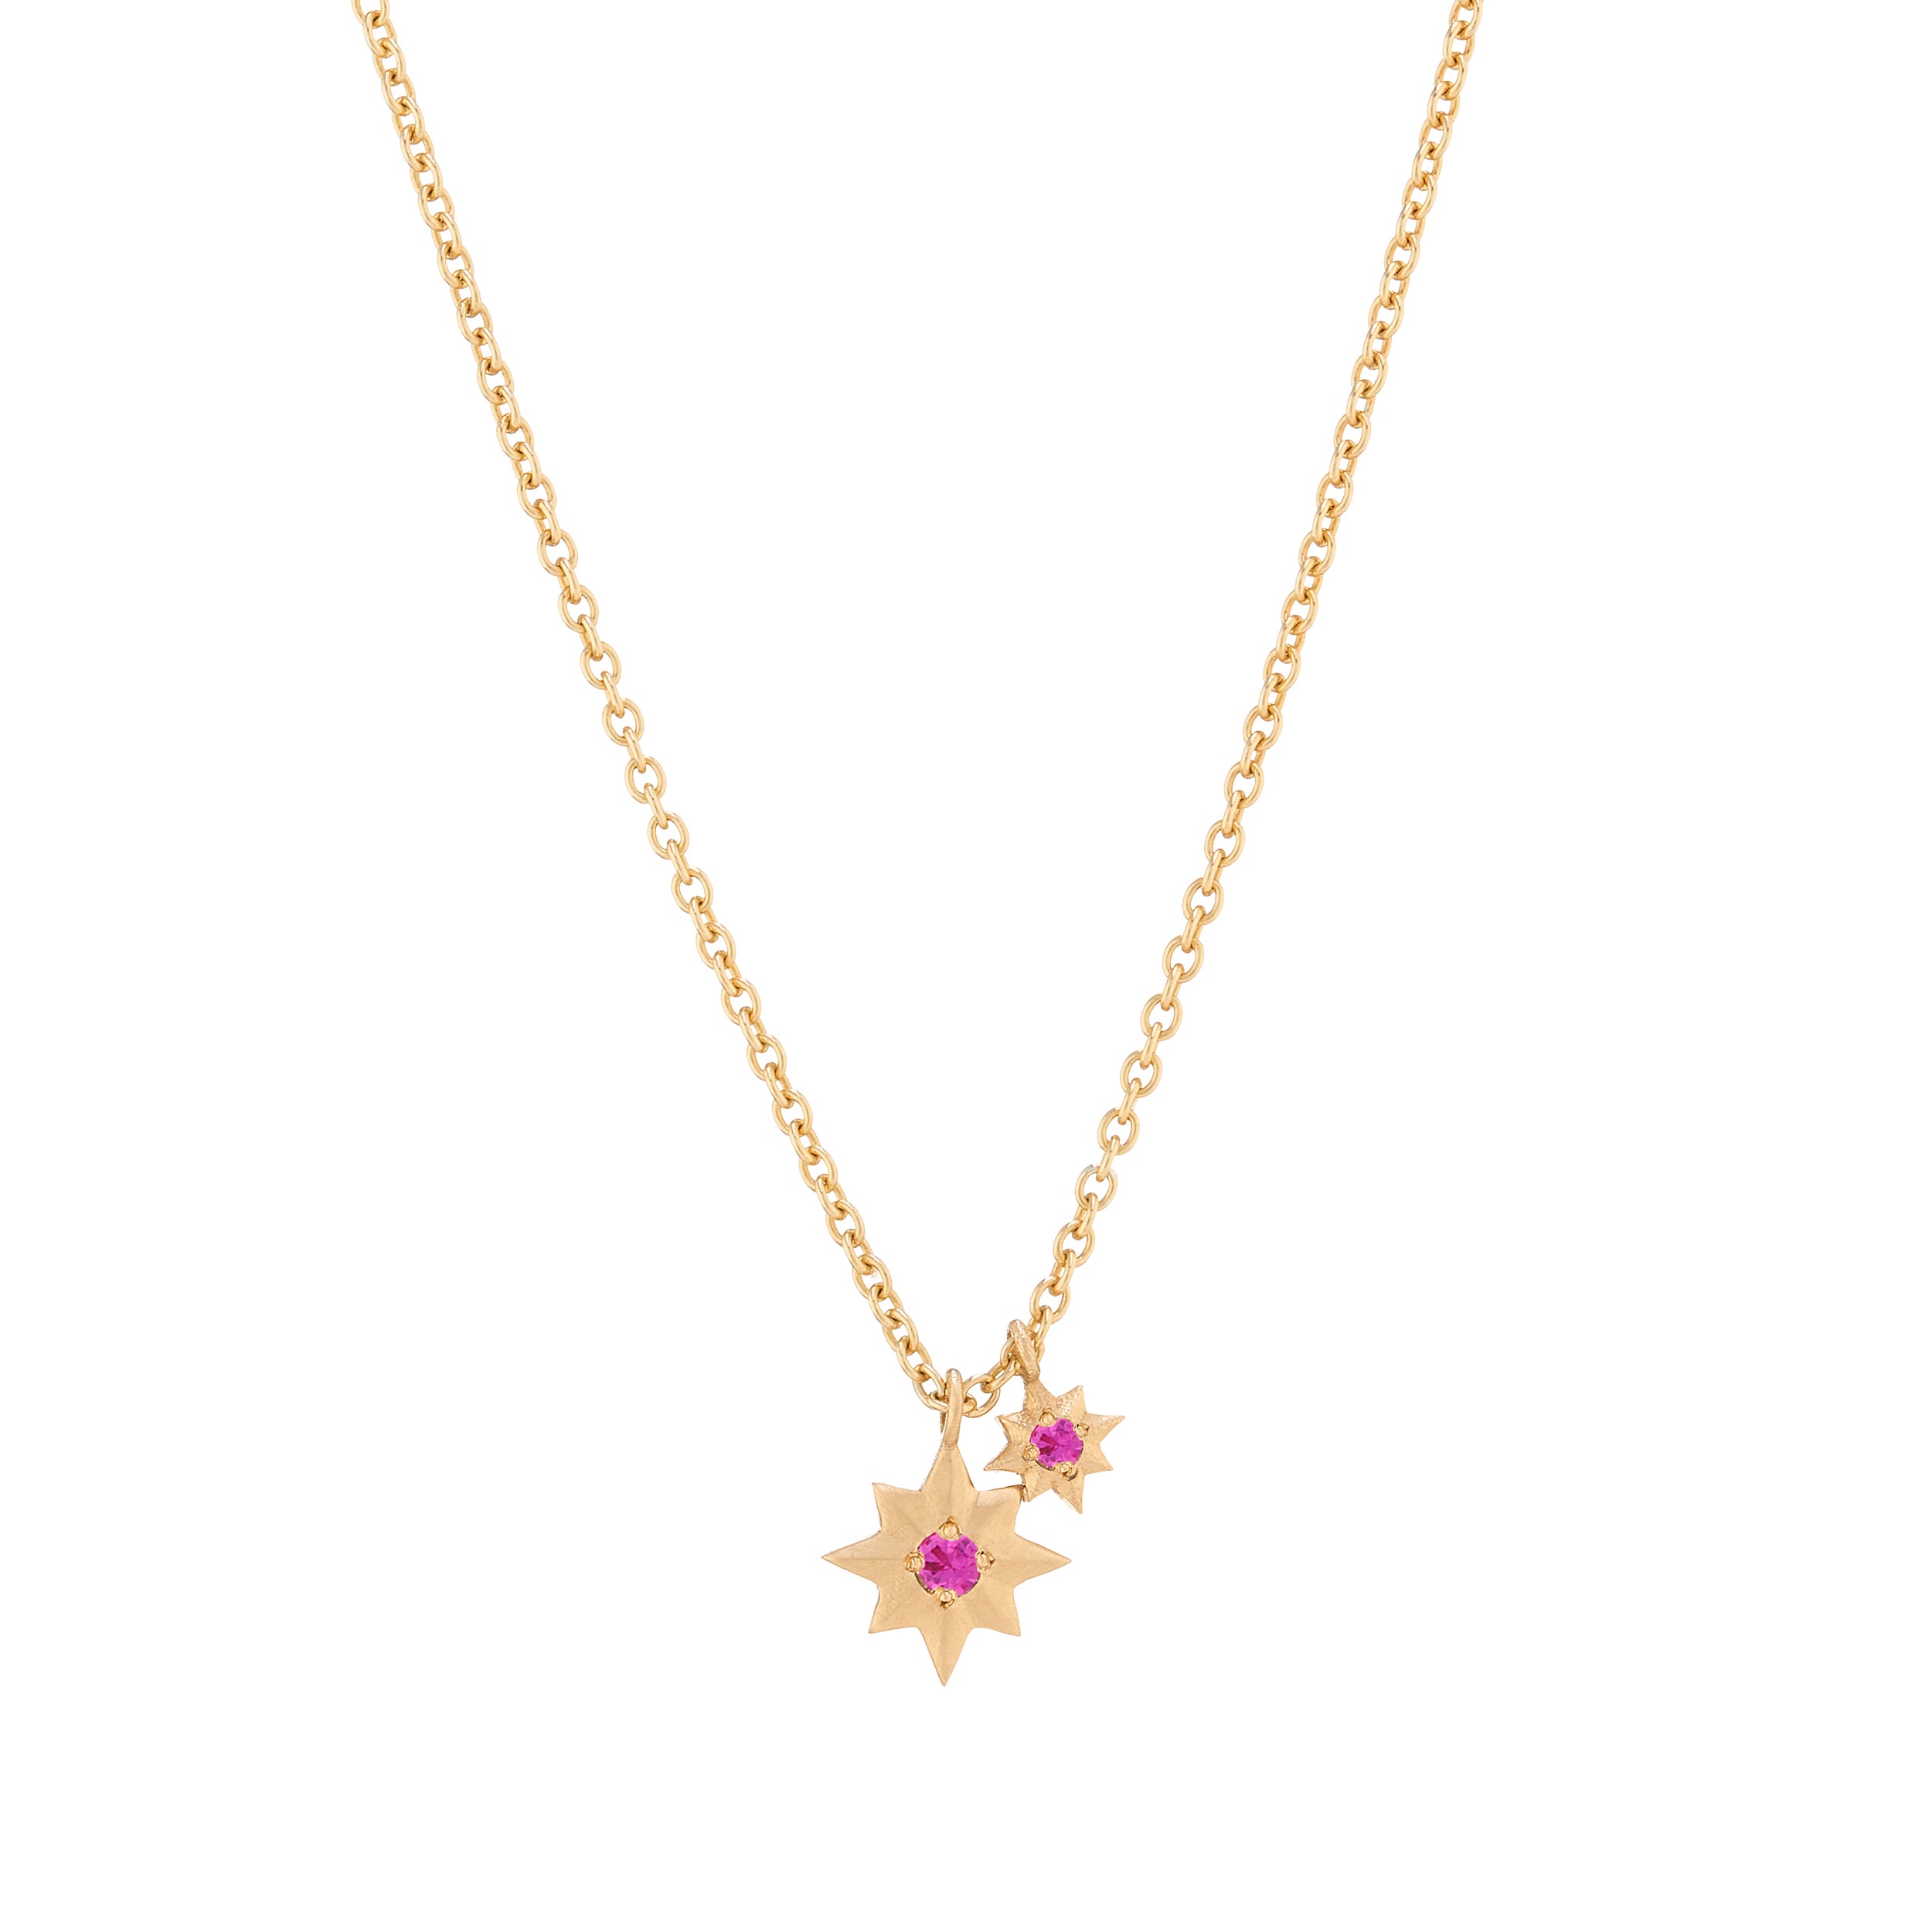 Star & Hearts Charms Necklace, Bracelet Set, Pink, Yellow